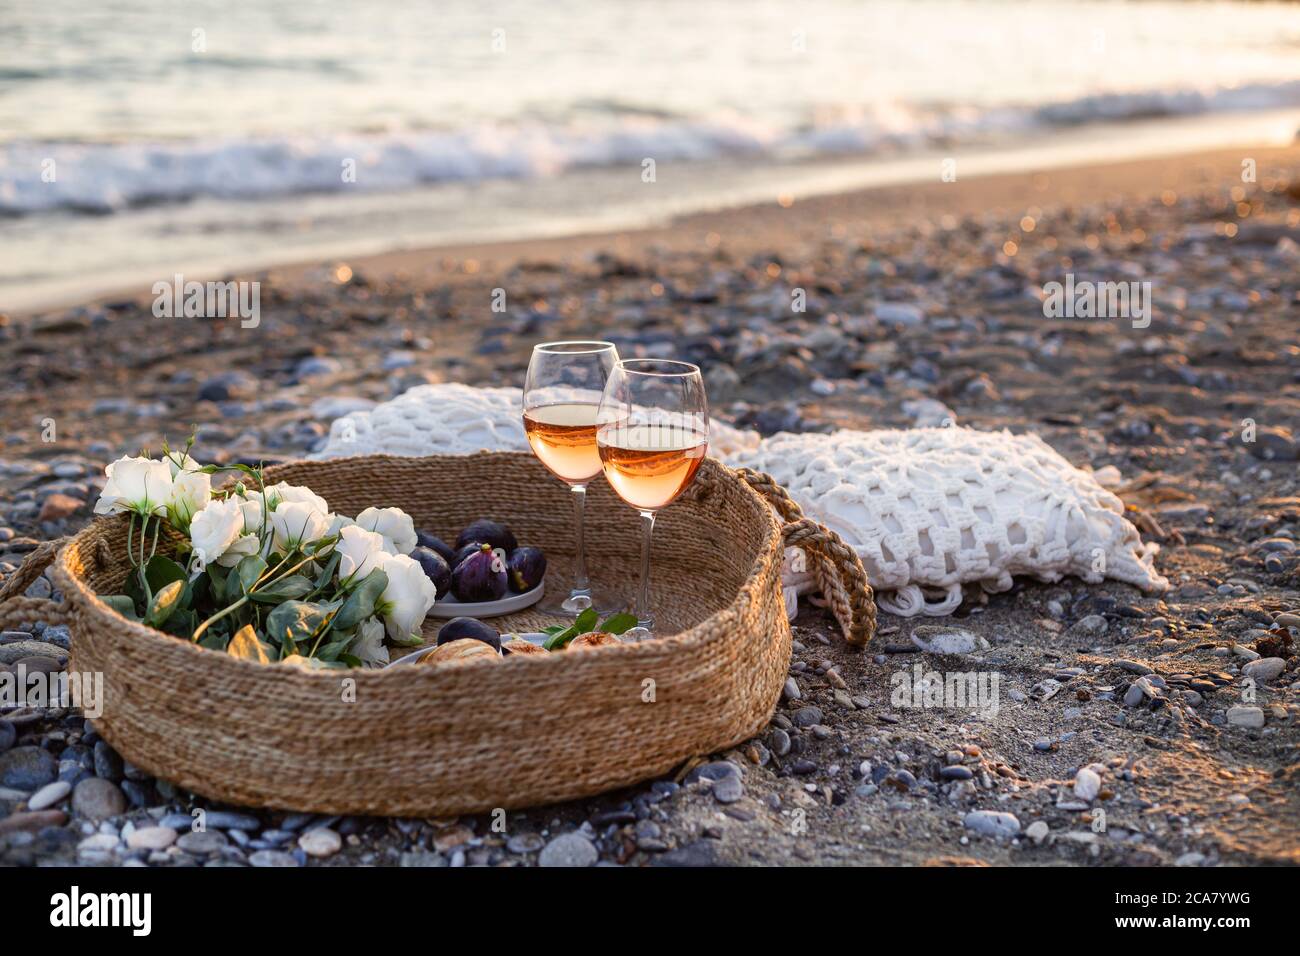 Horizontal image of the beach picnic with wine, figs, croissants and lisianthus flowers in a woven basket. Negative space. Stock Photo